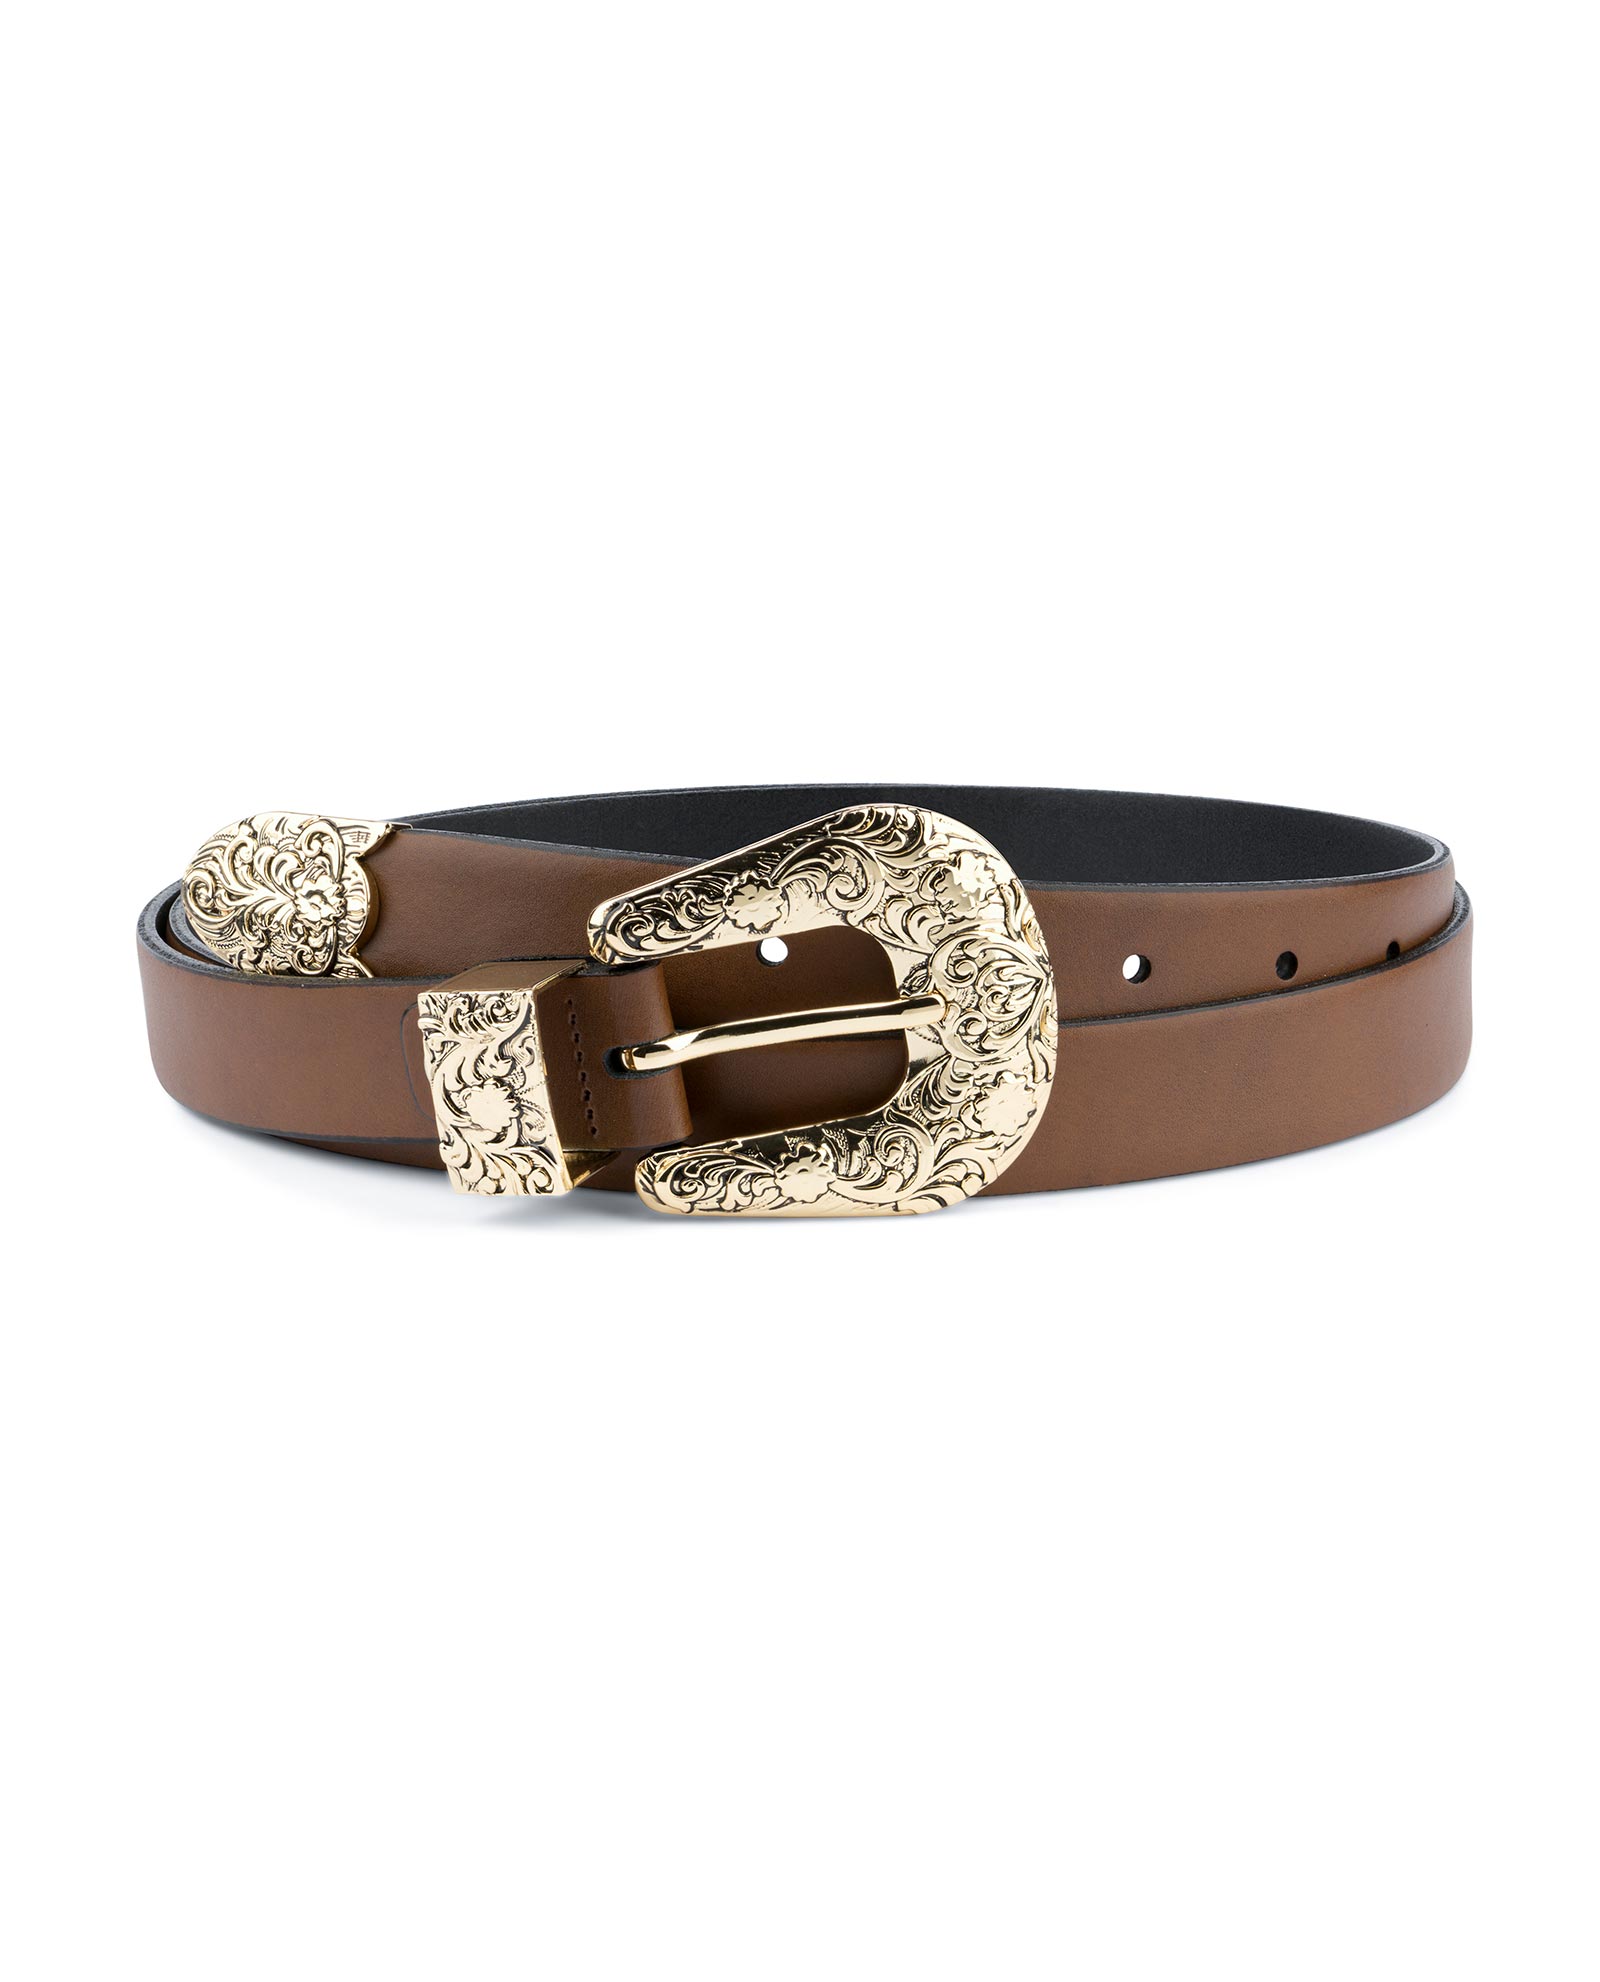 Brown Western Belt for Women with Gold Buckle 32 / 80 cm - Brown | Capo Pelle